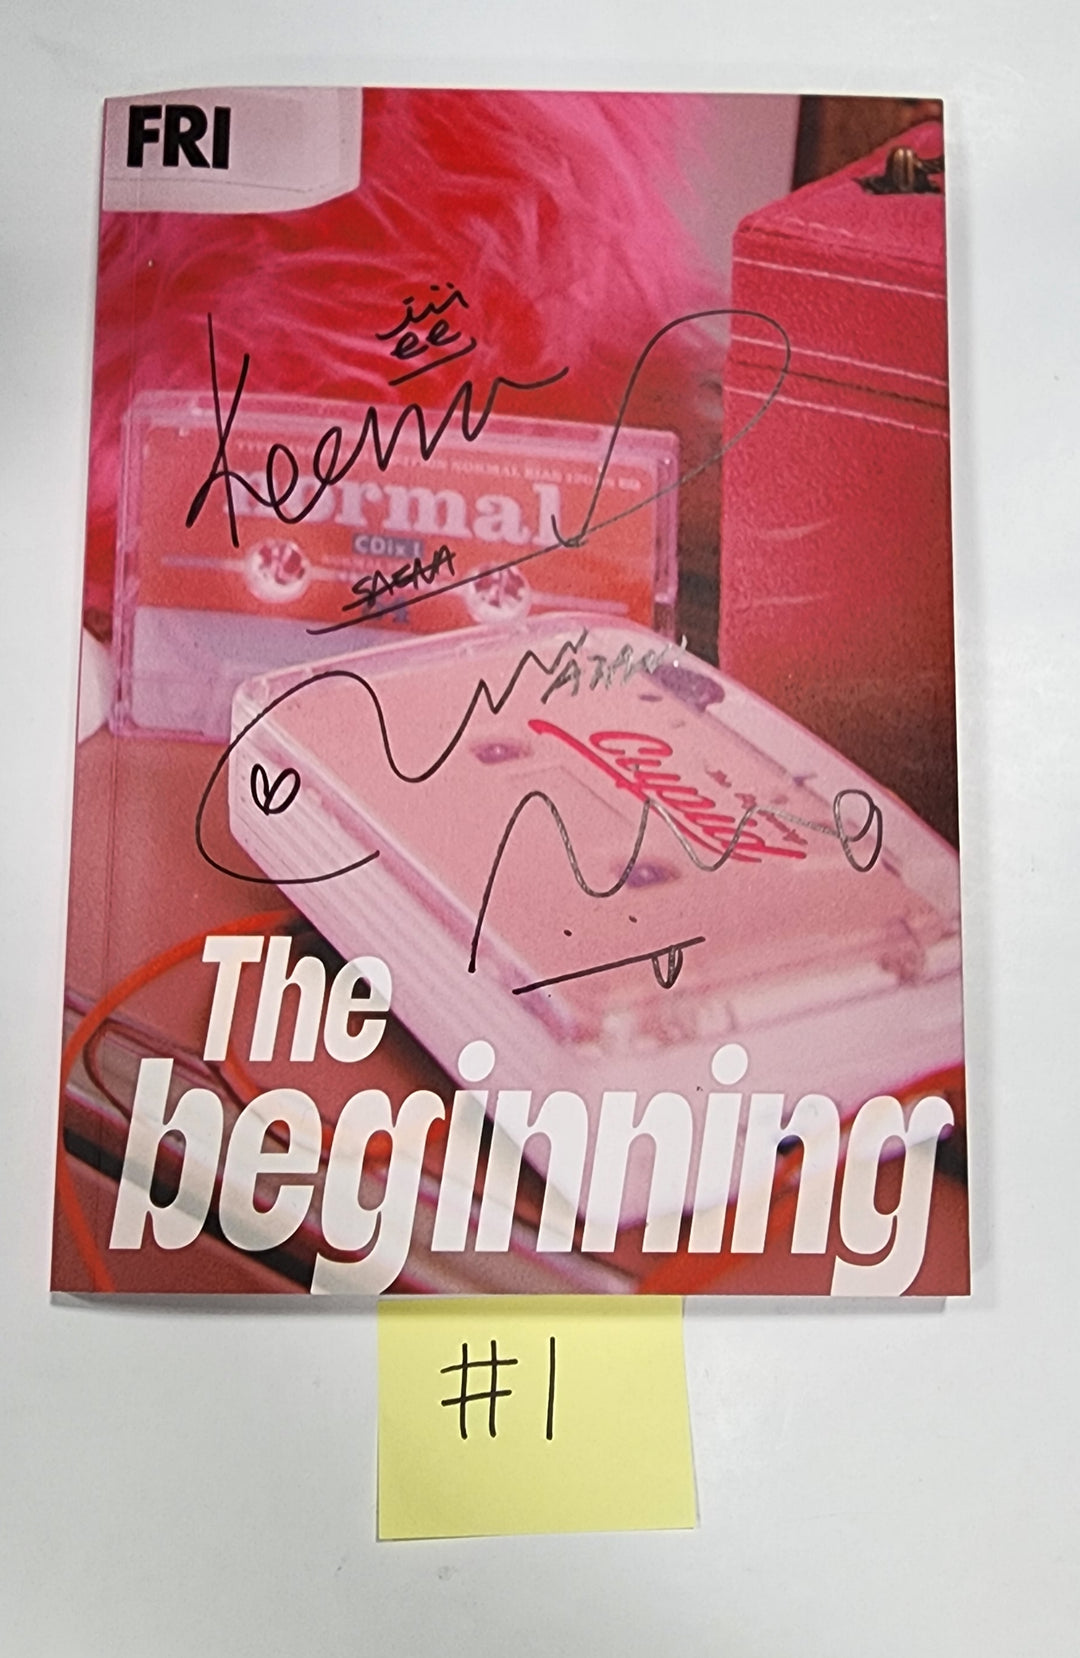 FIFTY FIFTY "The Beginning: Cupid" - Hand Autographed(Signed) Promo Album